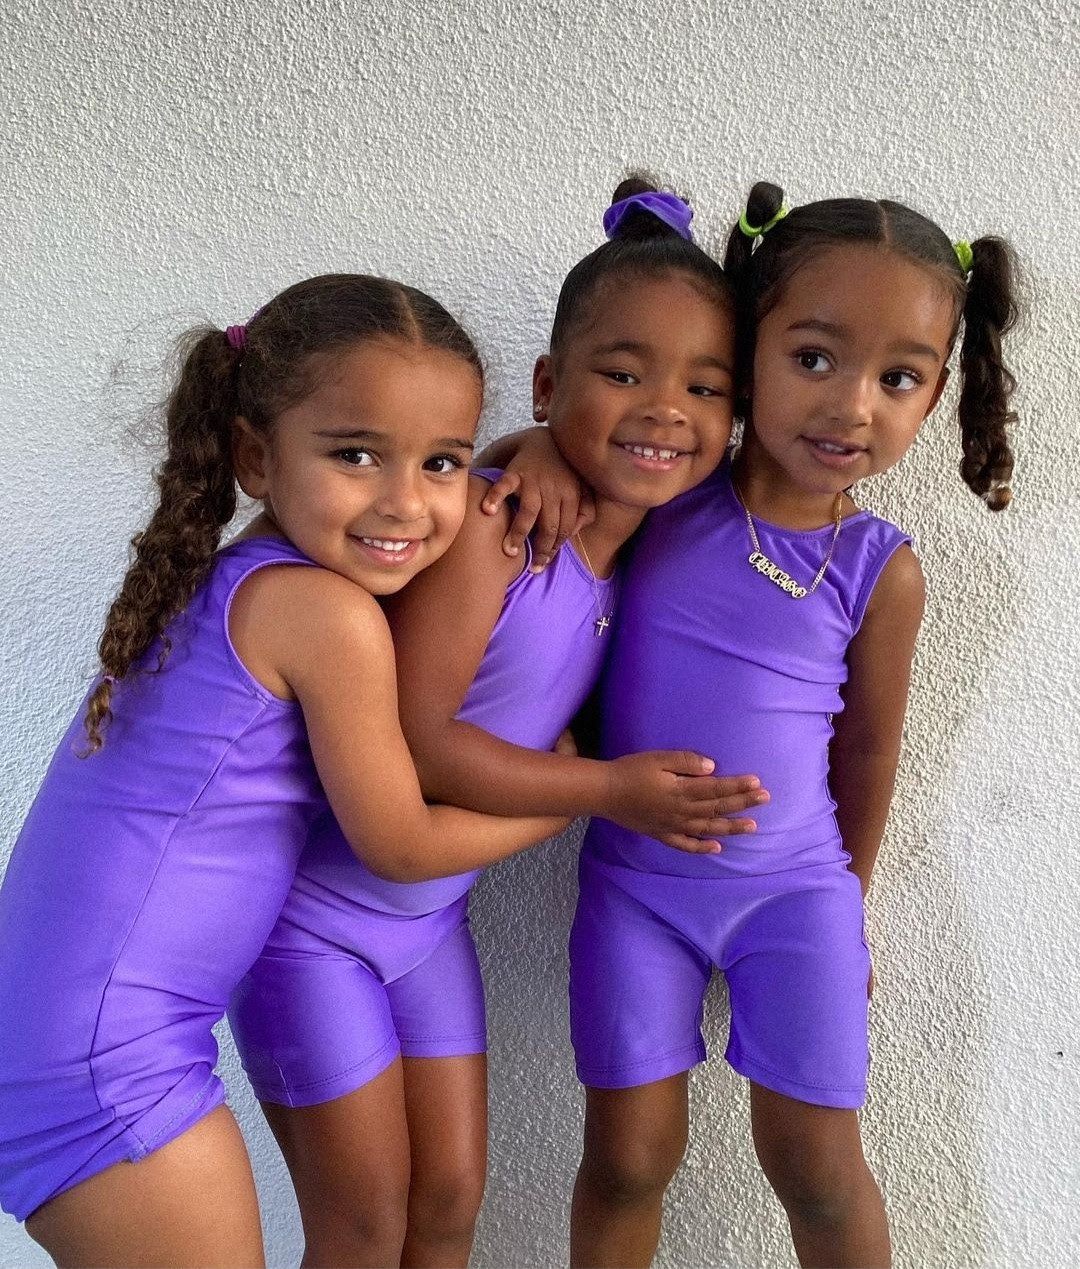 Khloe Kardashian shares adorable photos of her daughter True with cousins Dream and Chicago in matching purple leotards